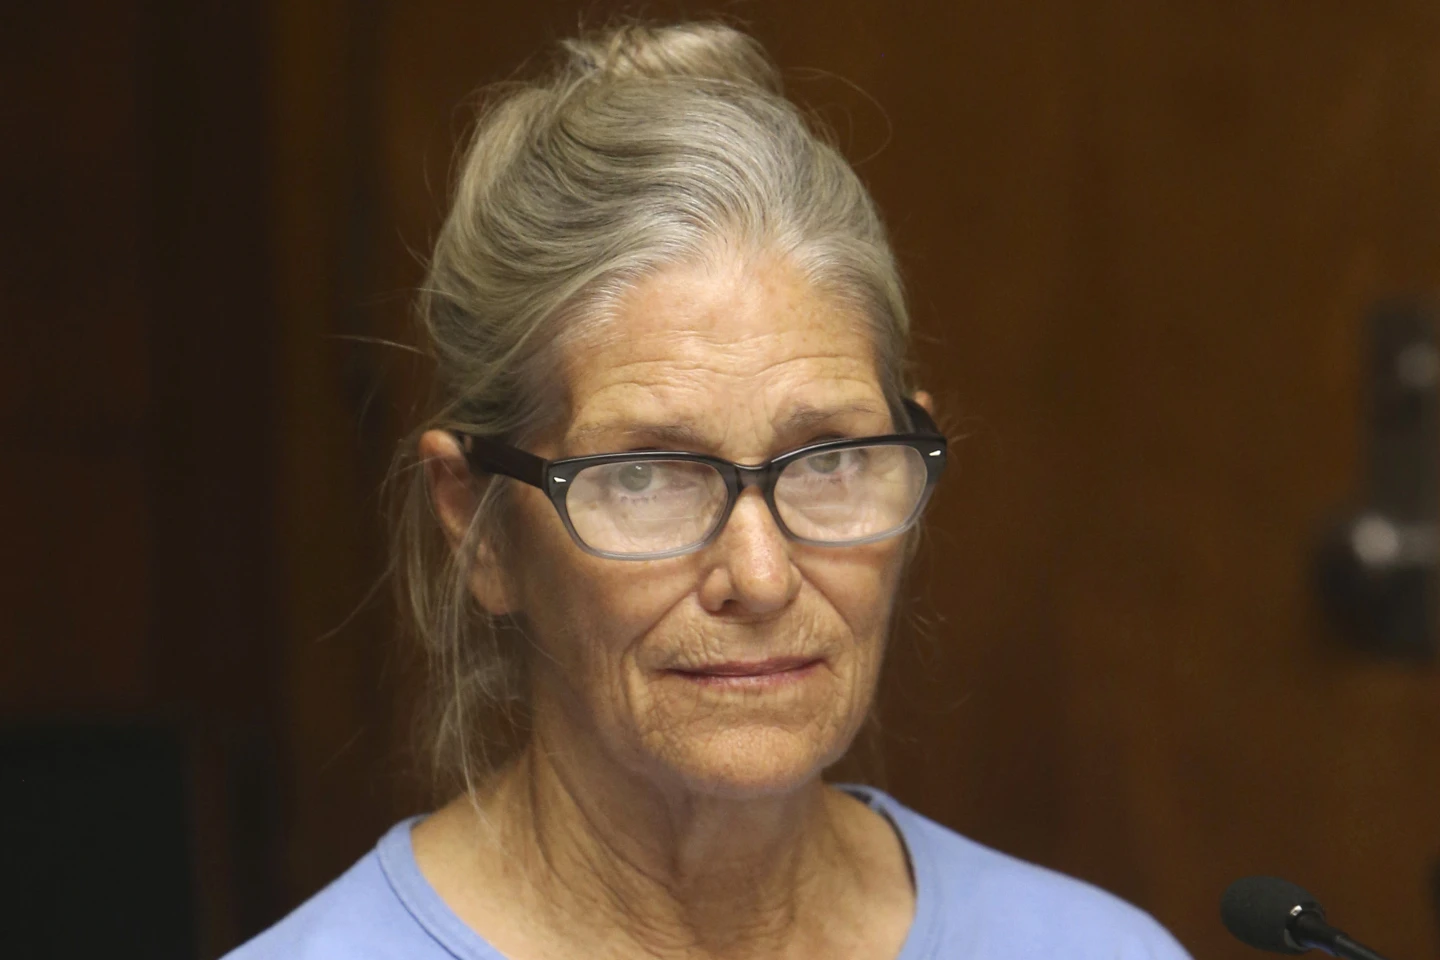 Charles Manson follower Leslie Van Houten released from prison a half-century after grisly killings (apnews.com)